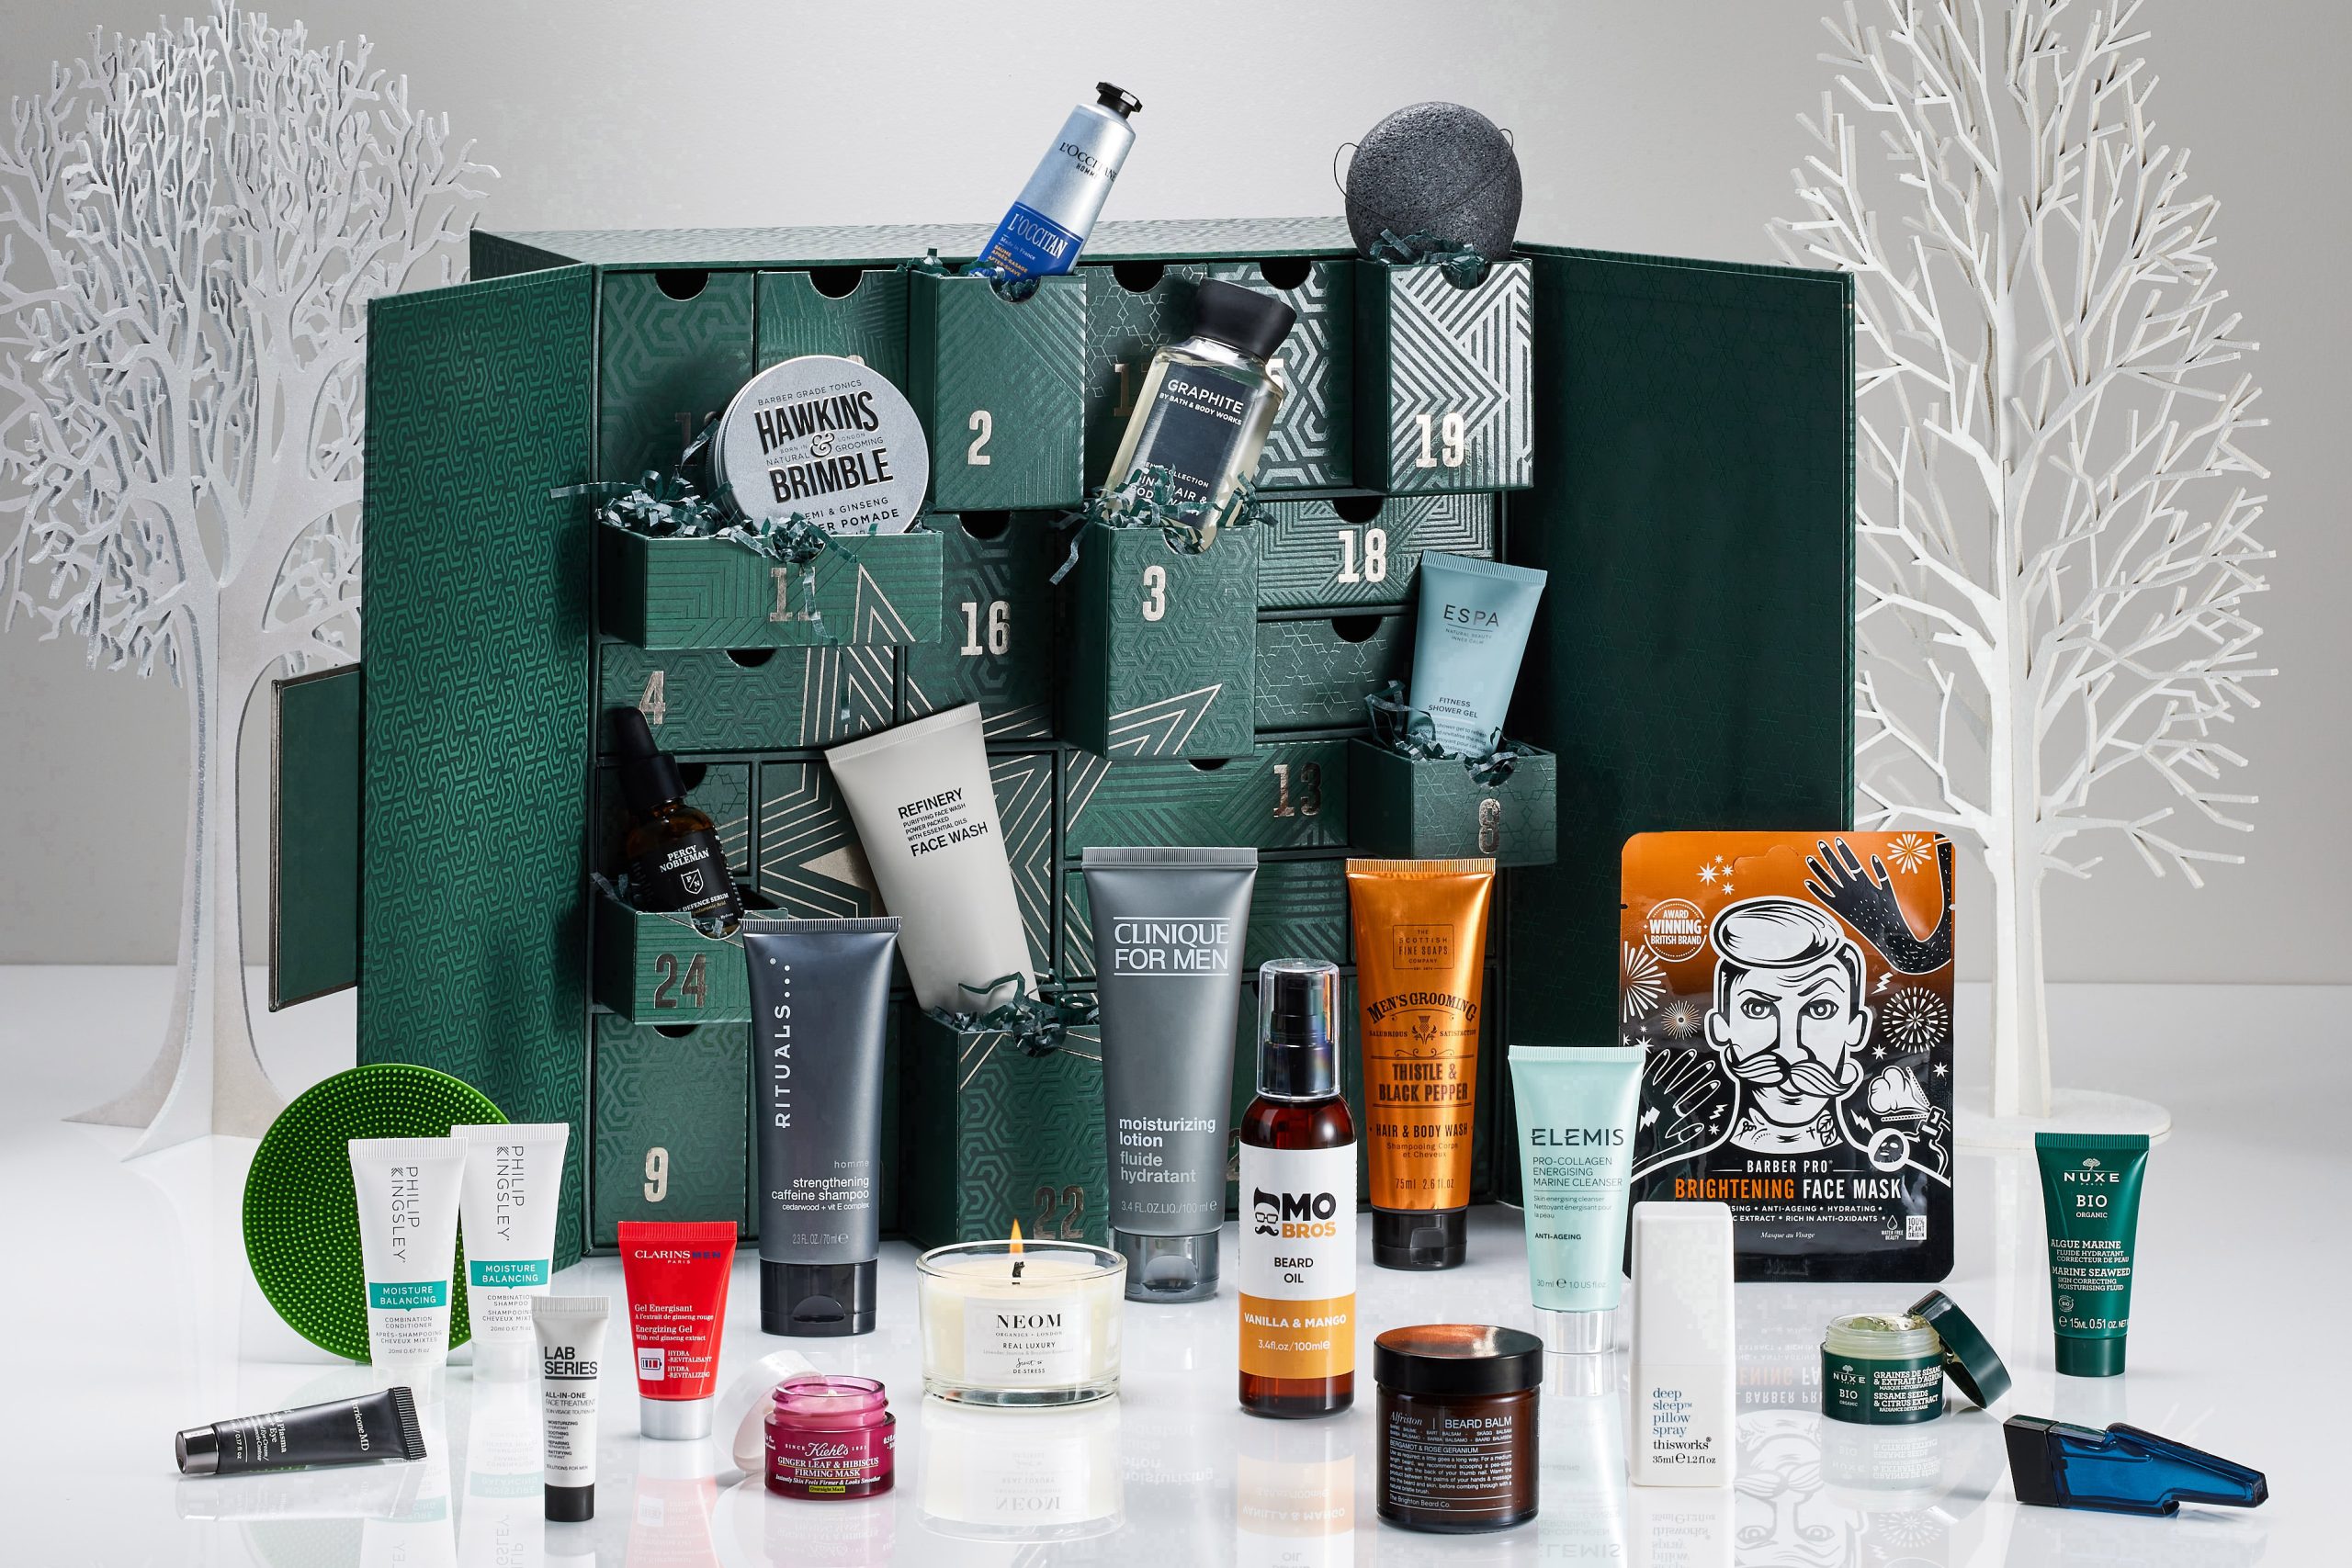 Next's 25 Days of Grooming advent calendar with all the products found inside on display.